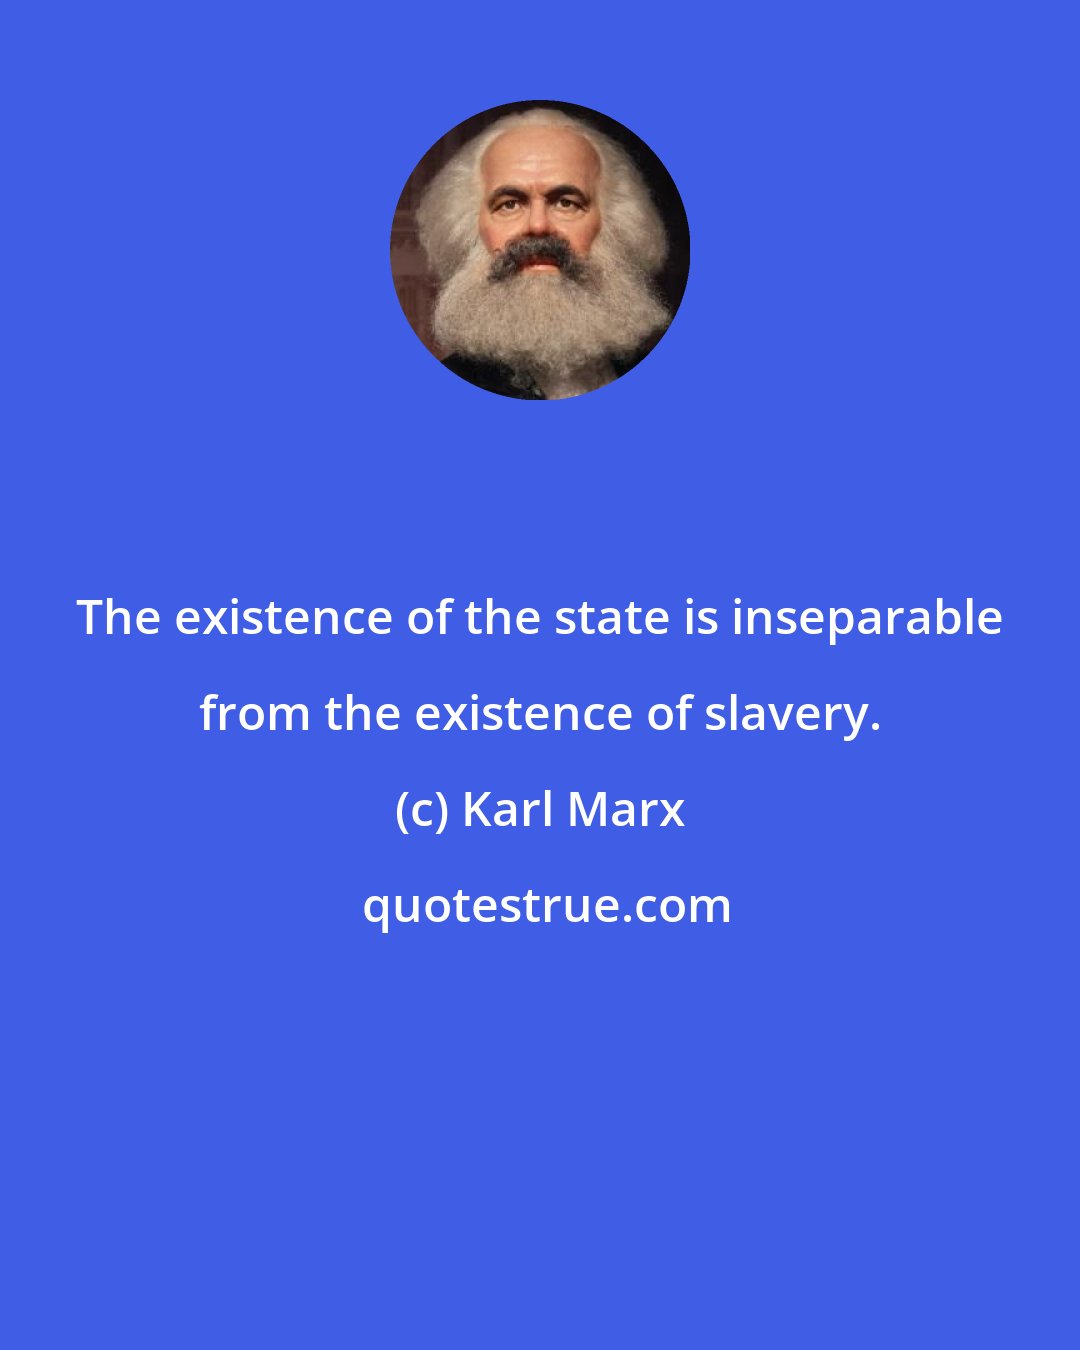 Karl Marx: The existence of the state is inseparable from the existence of slavery.